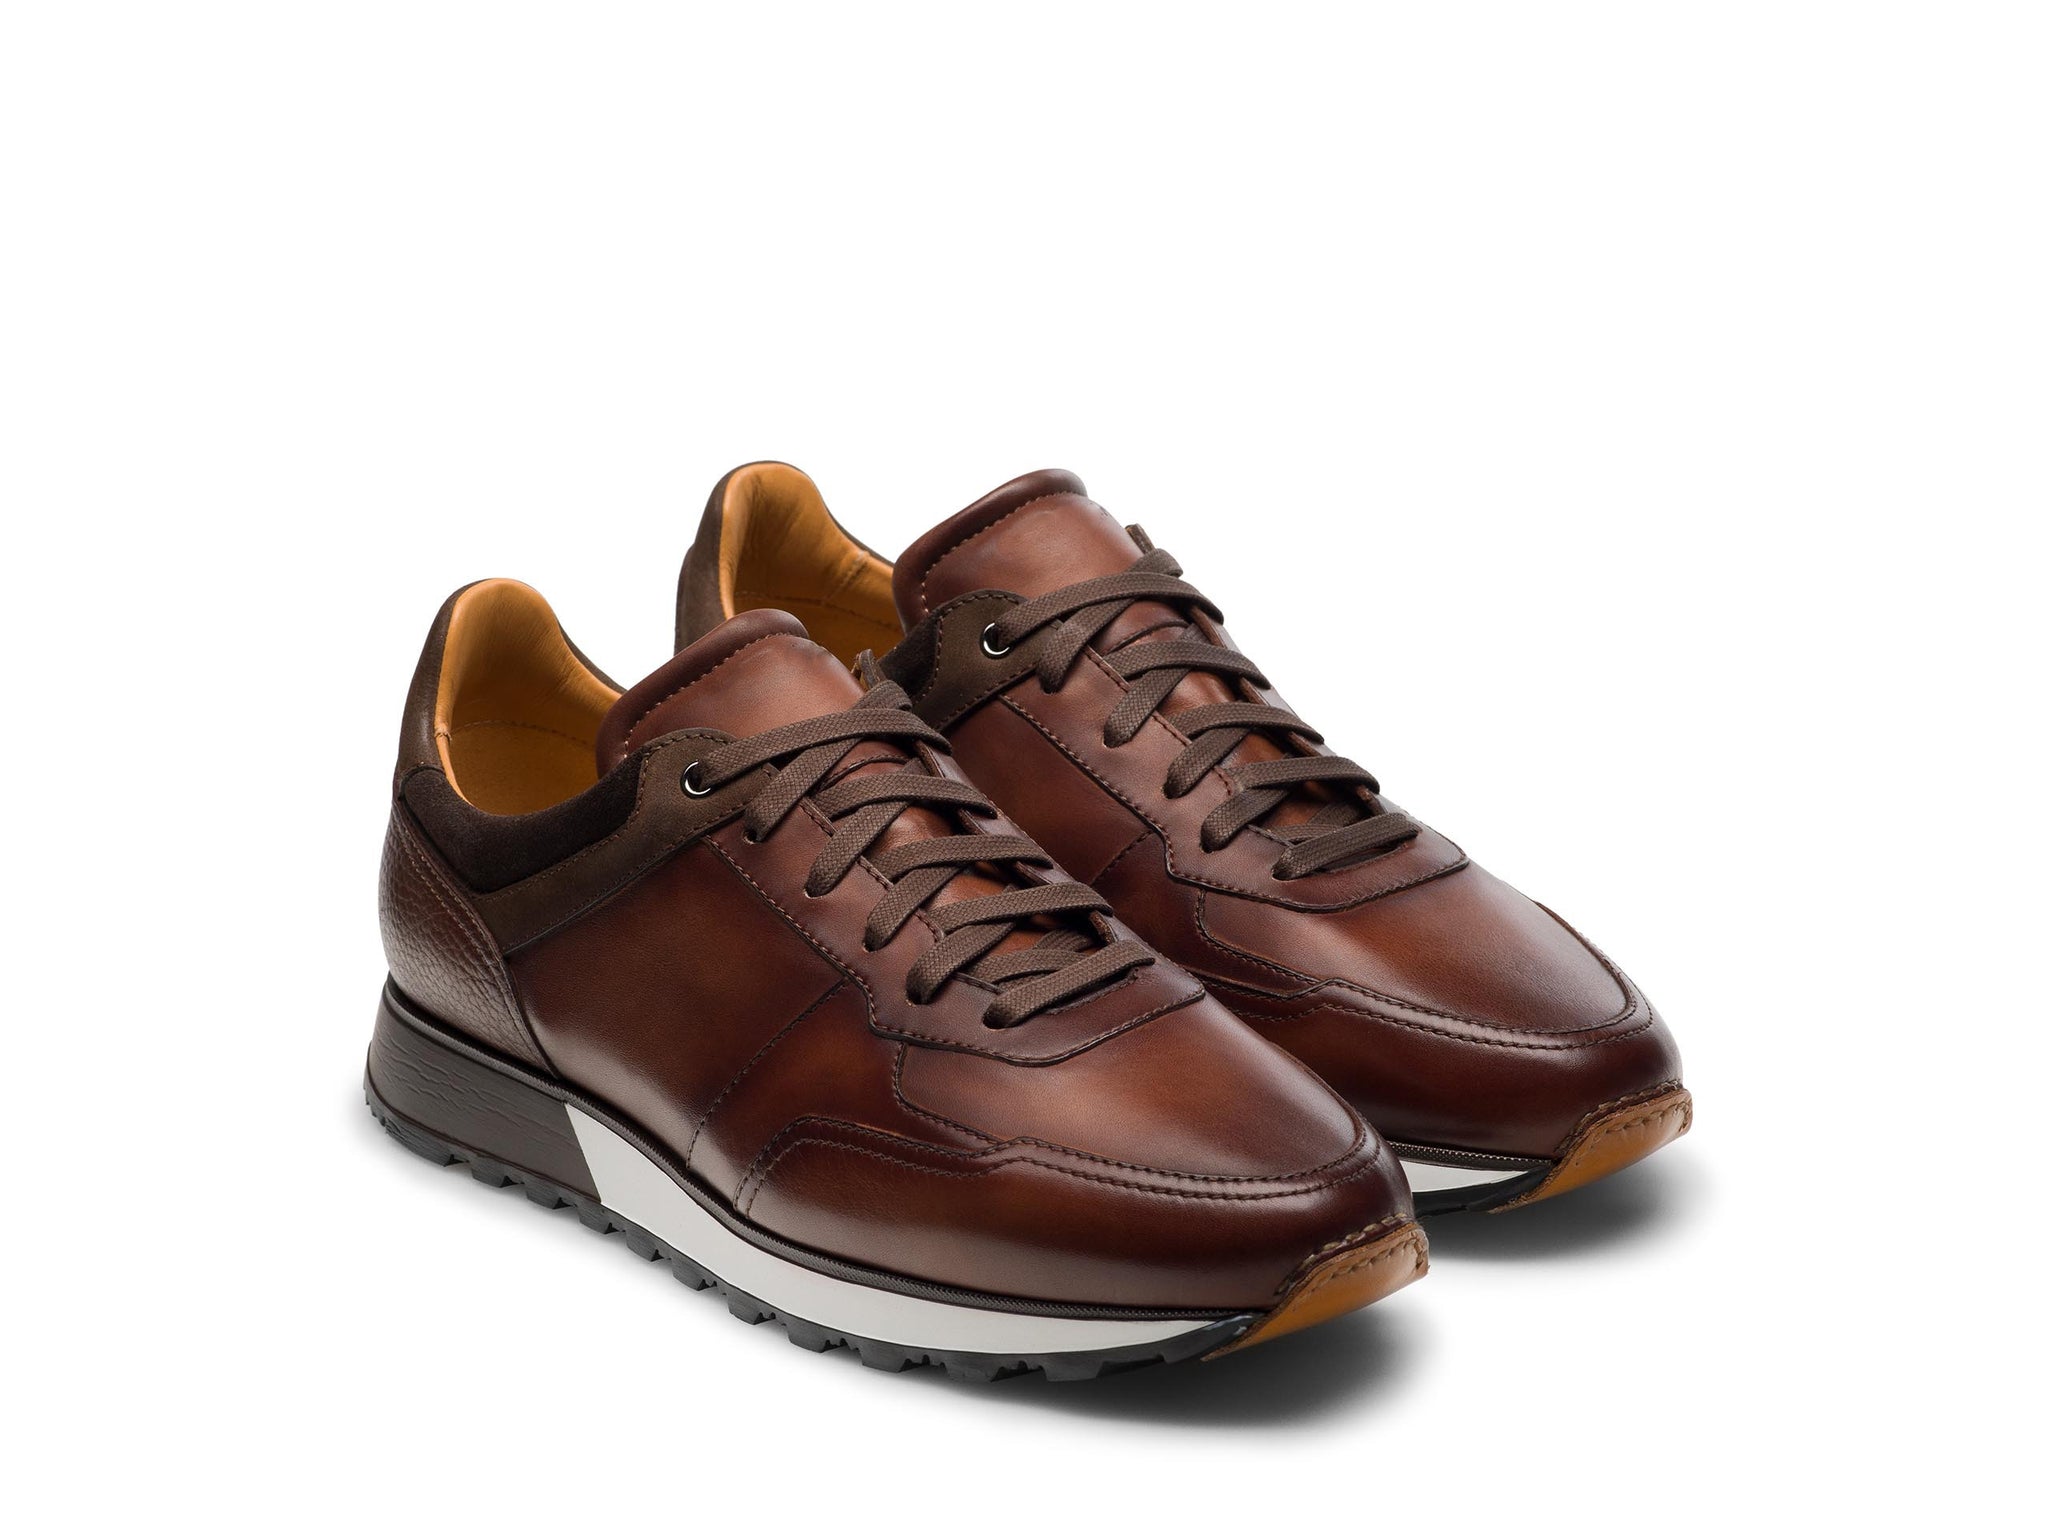 FLAT LEATHER LACE-UP SHOES - Brown | ZARA India